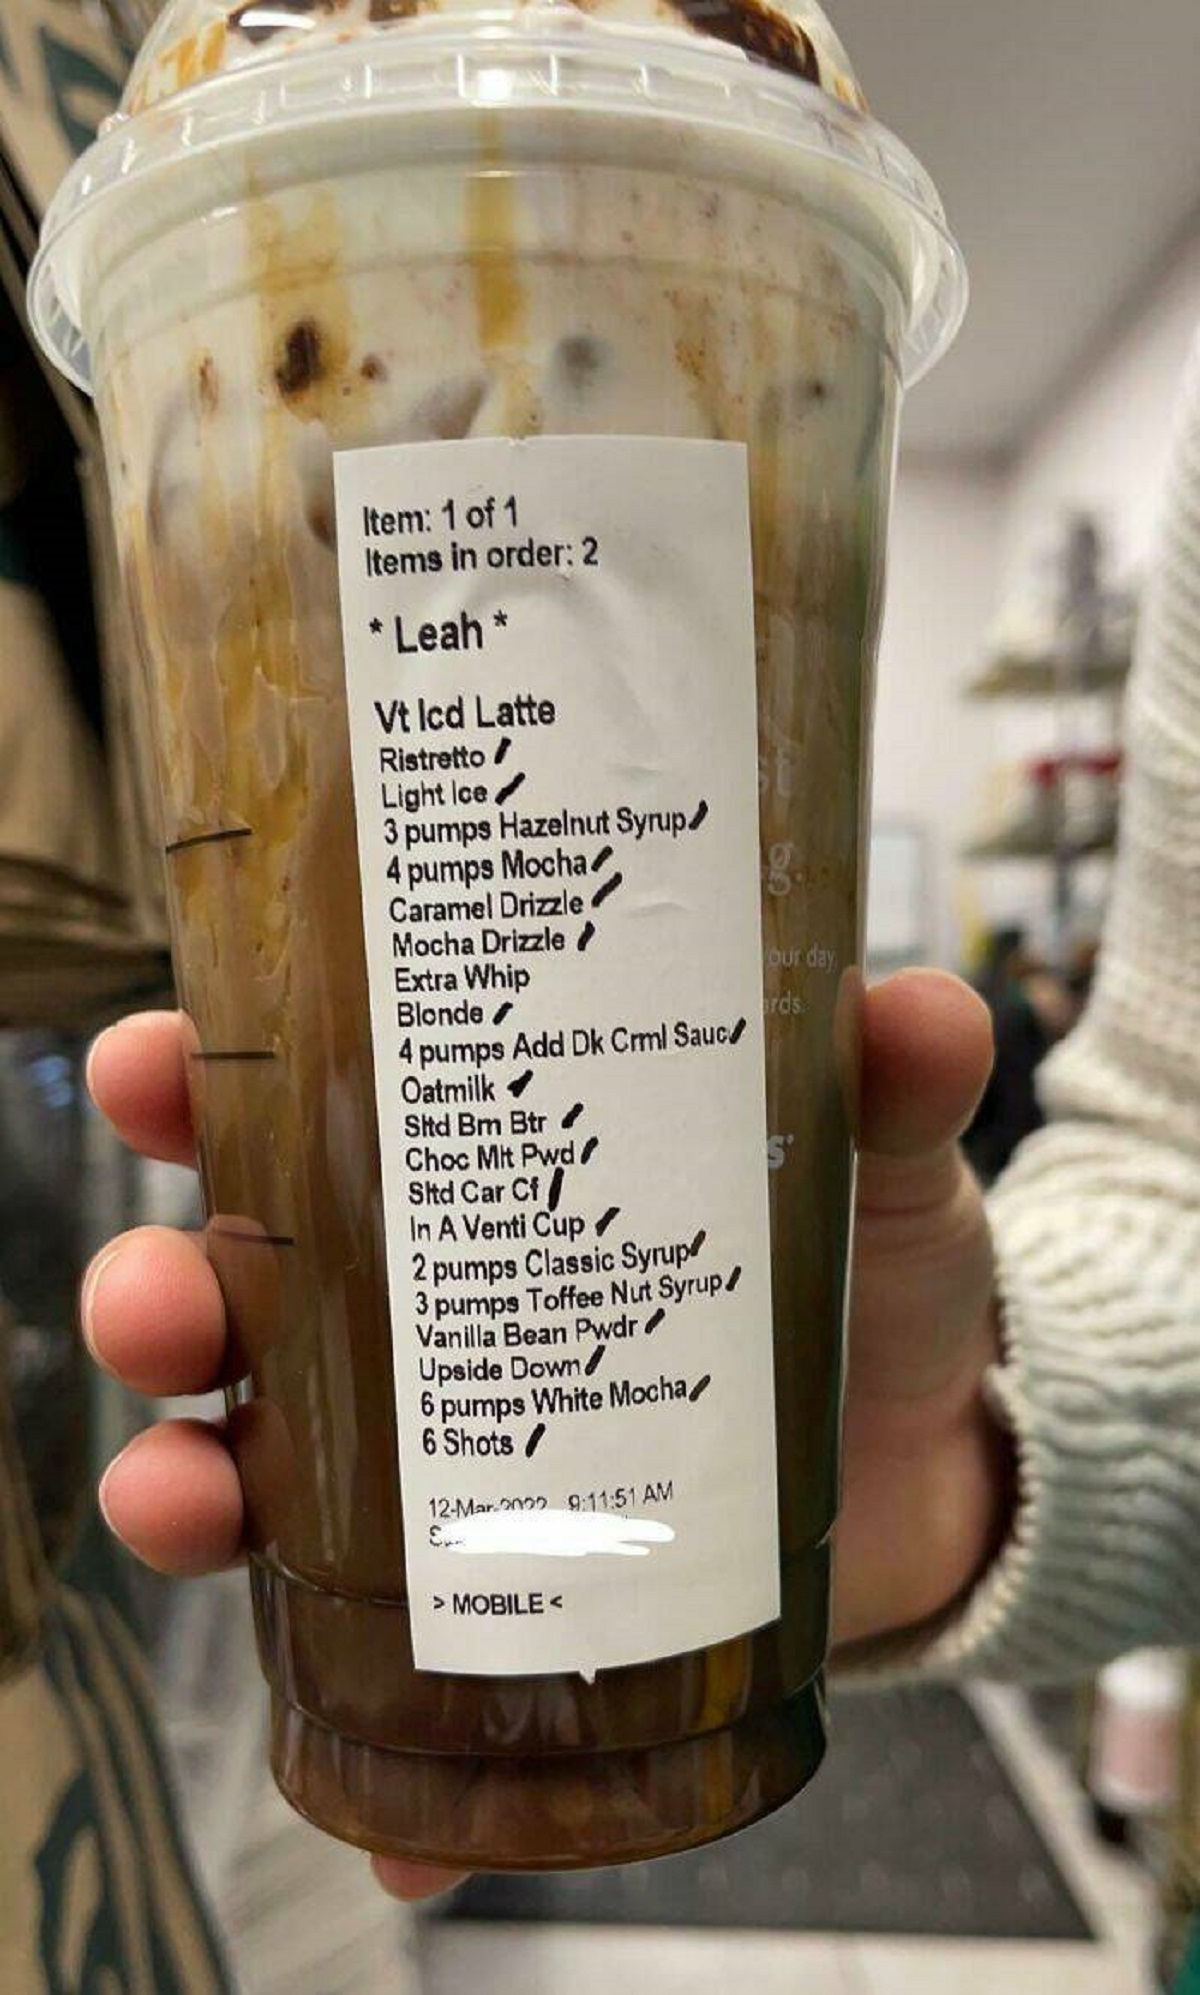 "My Sister Works At A Starbucks And This Was Someone's "Simple" Order"